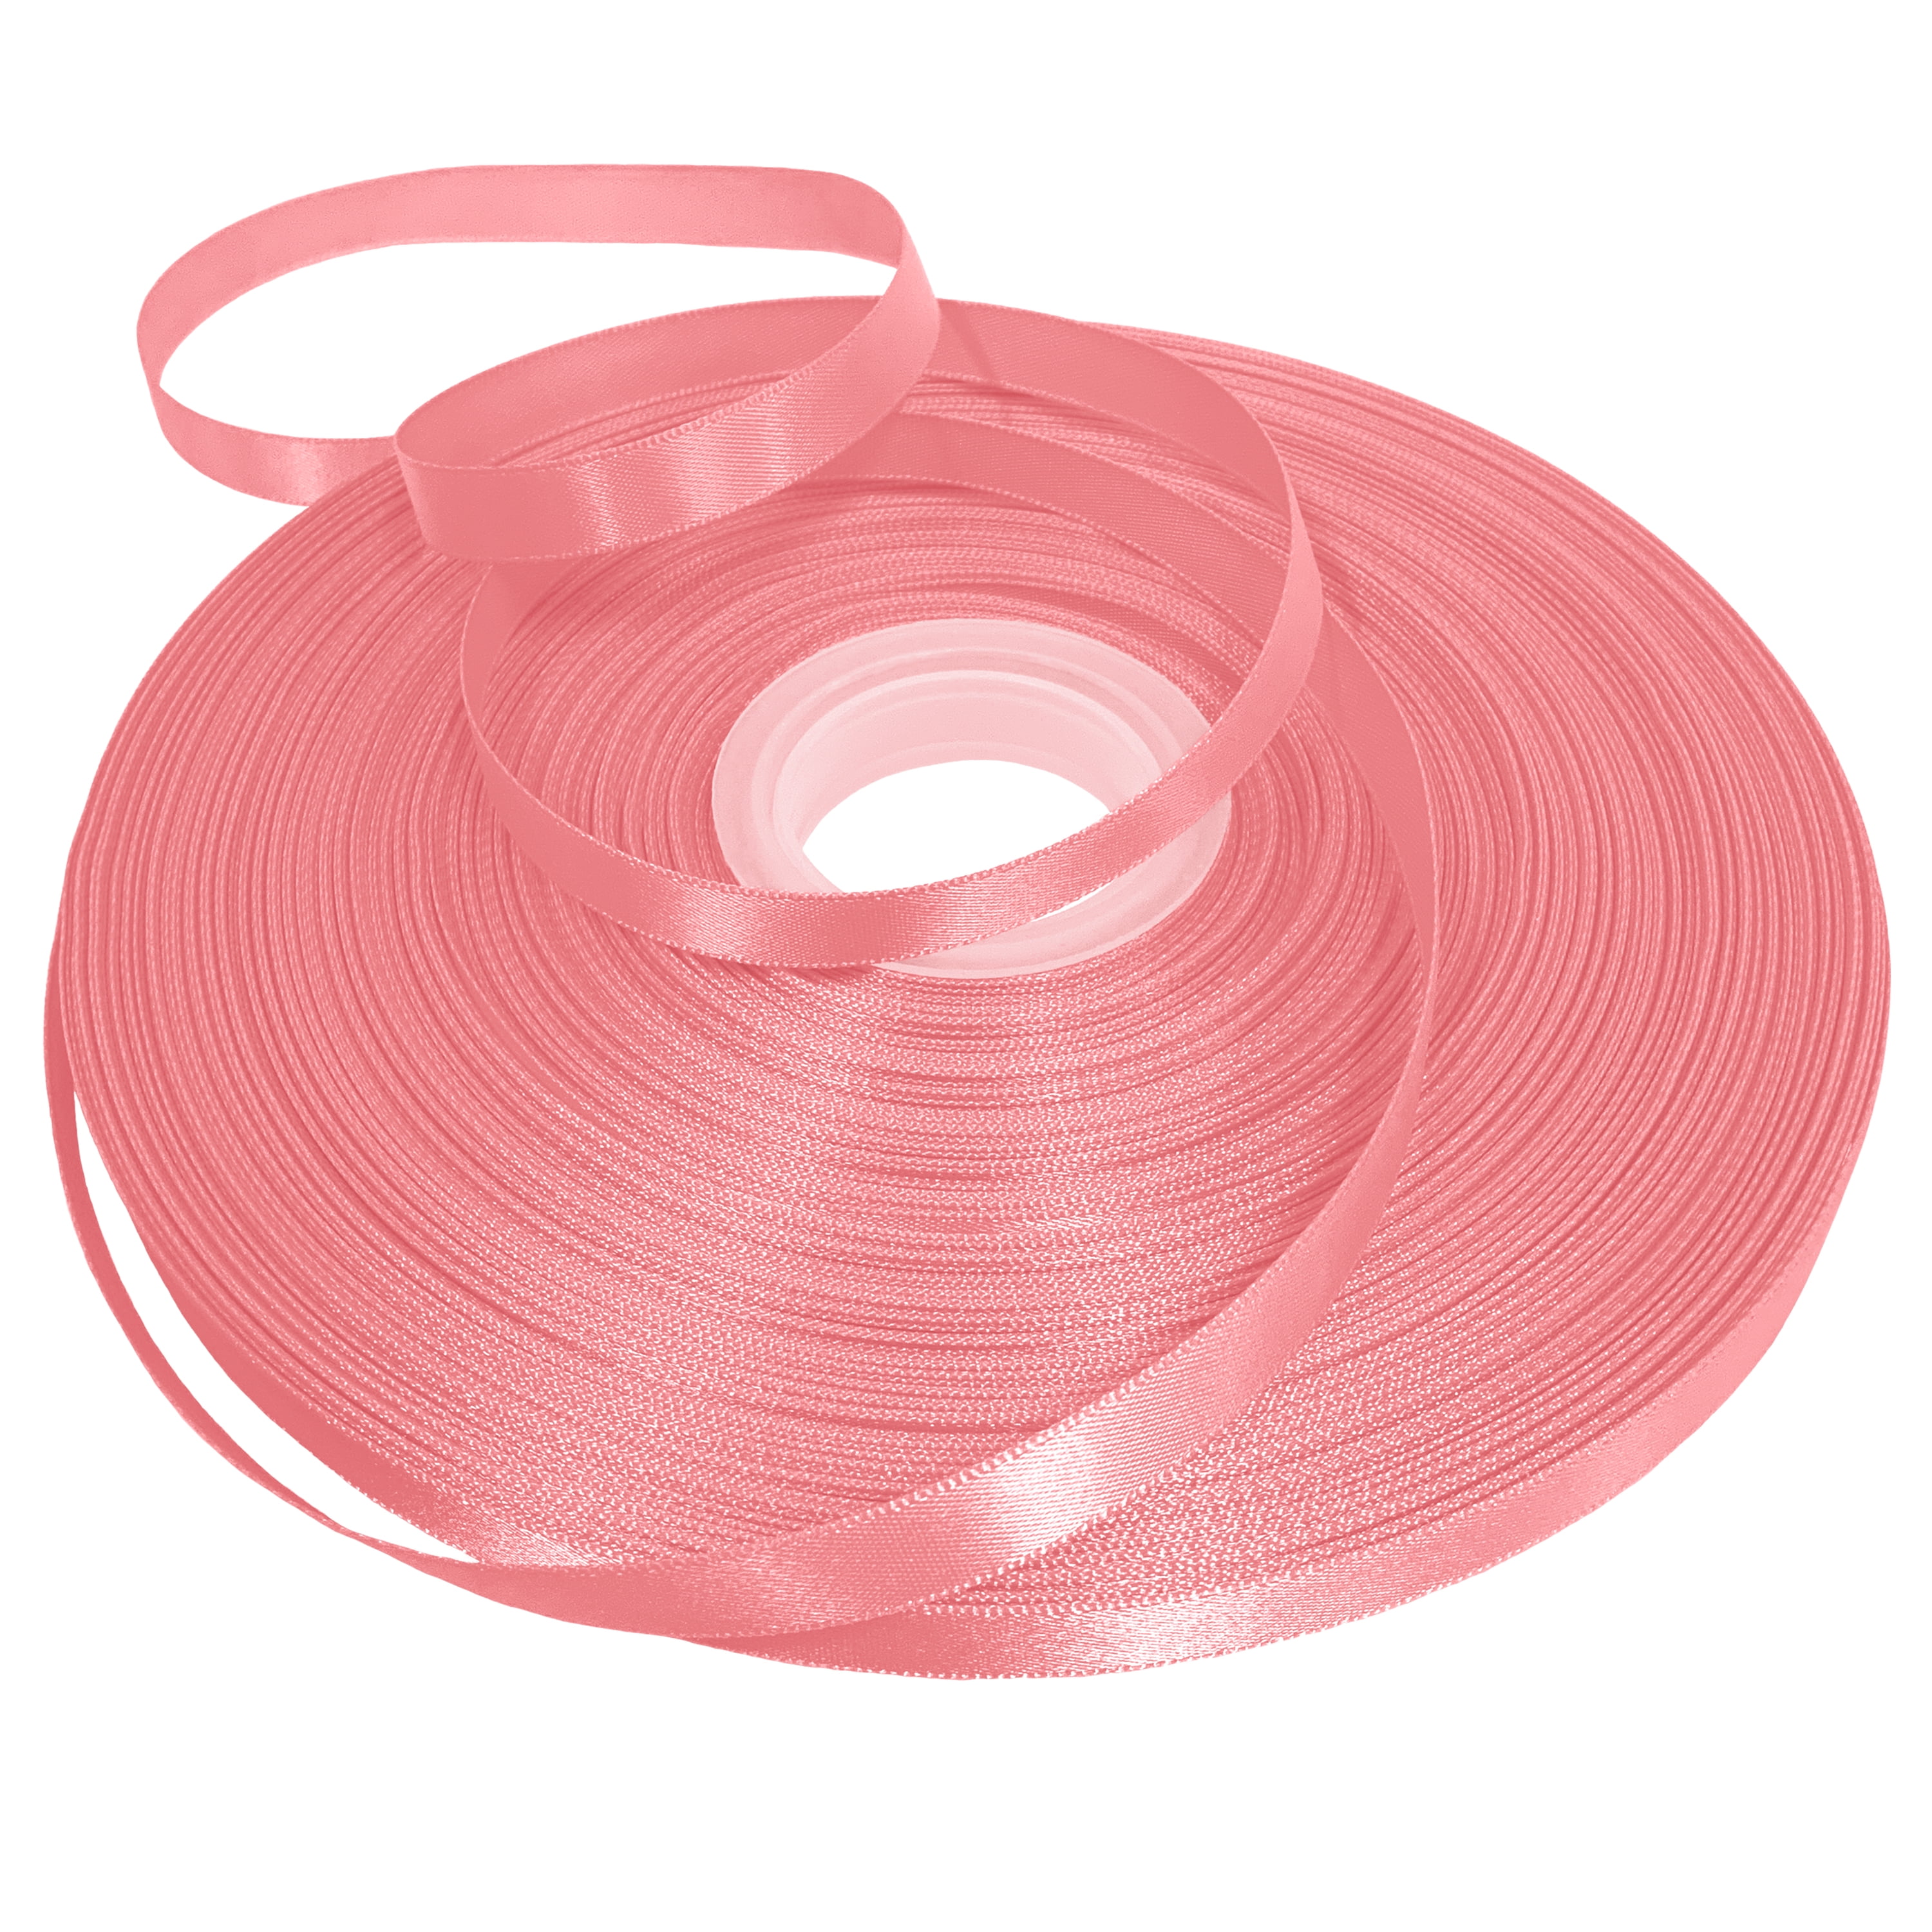 Neon pink double side satin ribbon - Lace To Love